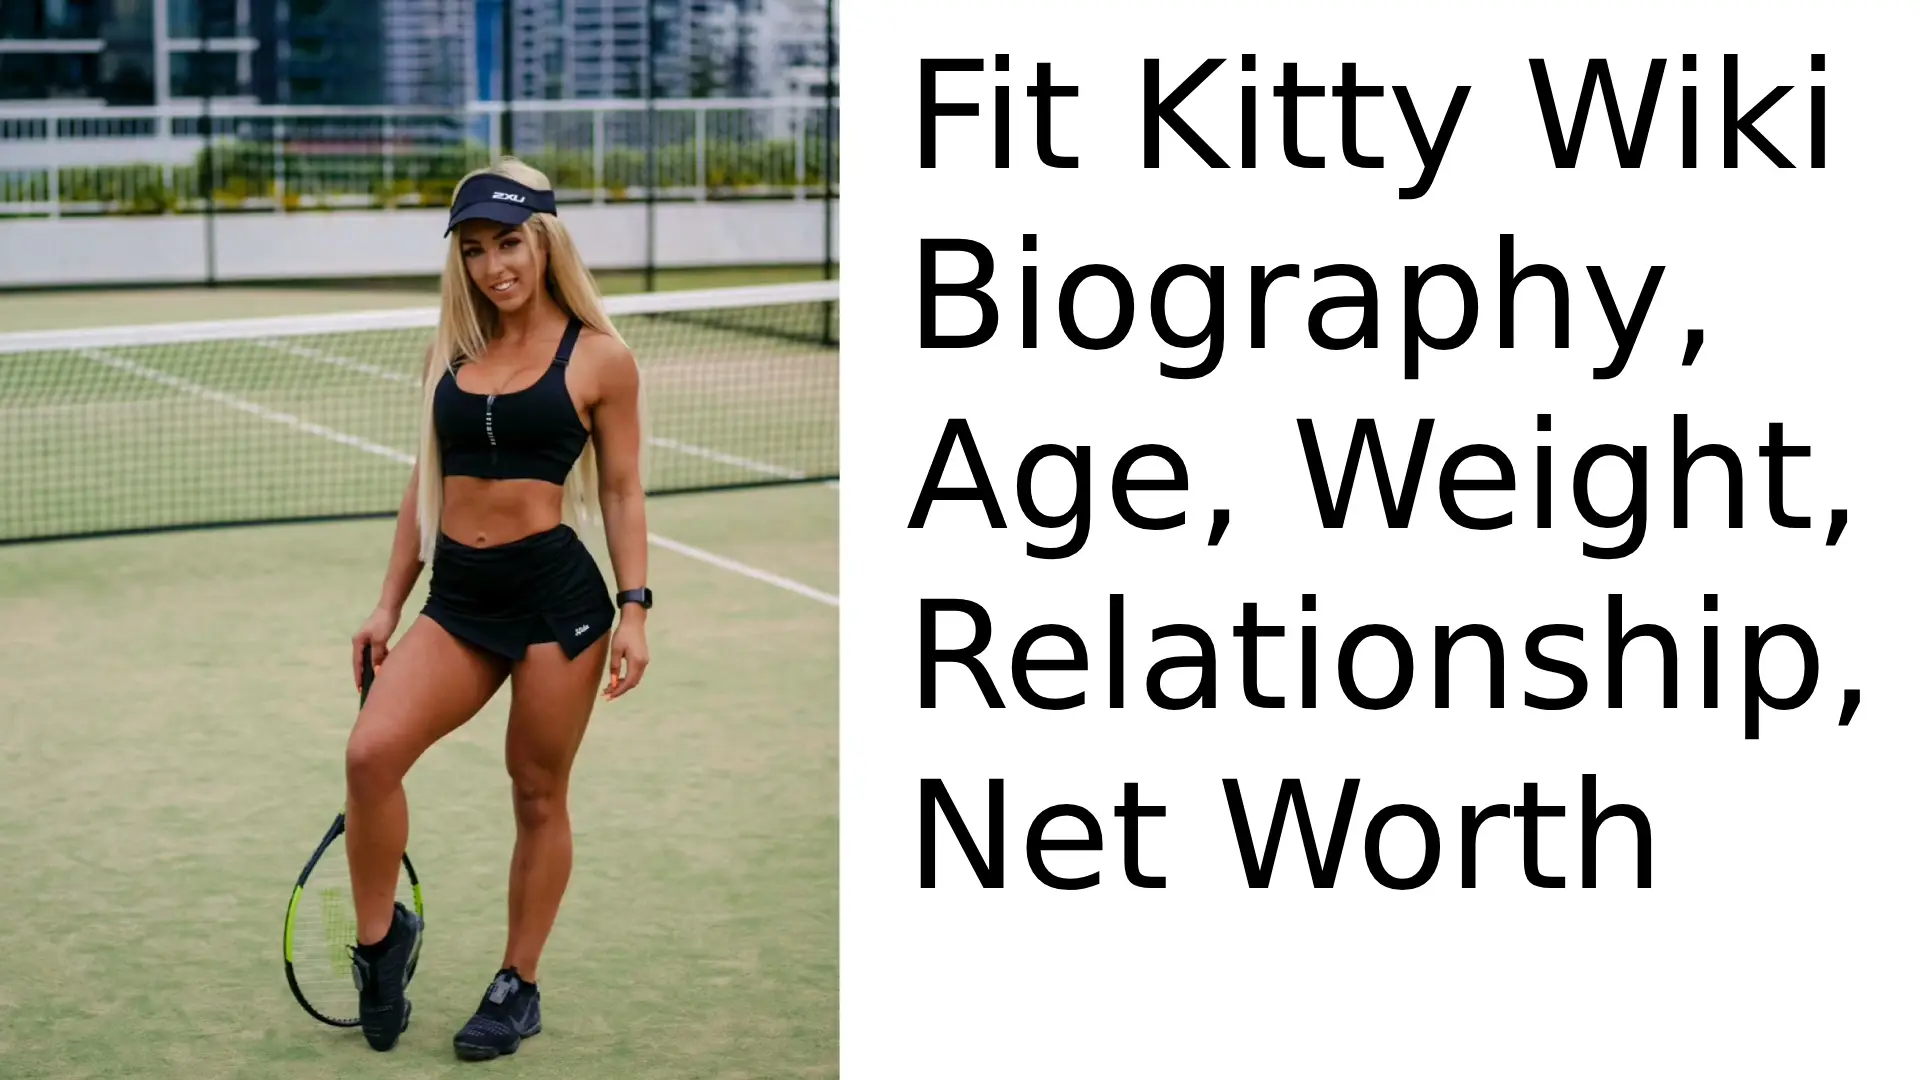 Fit Kitty Wiki Biography